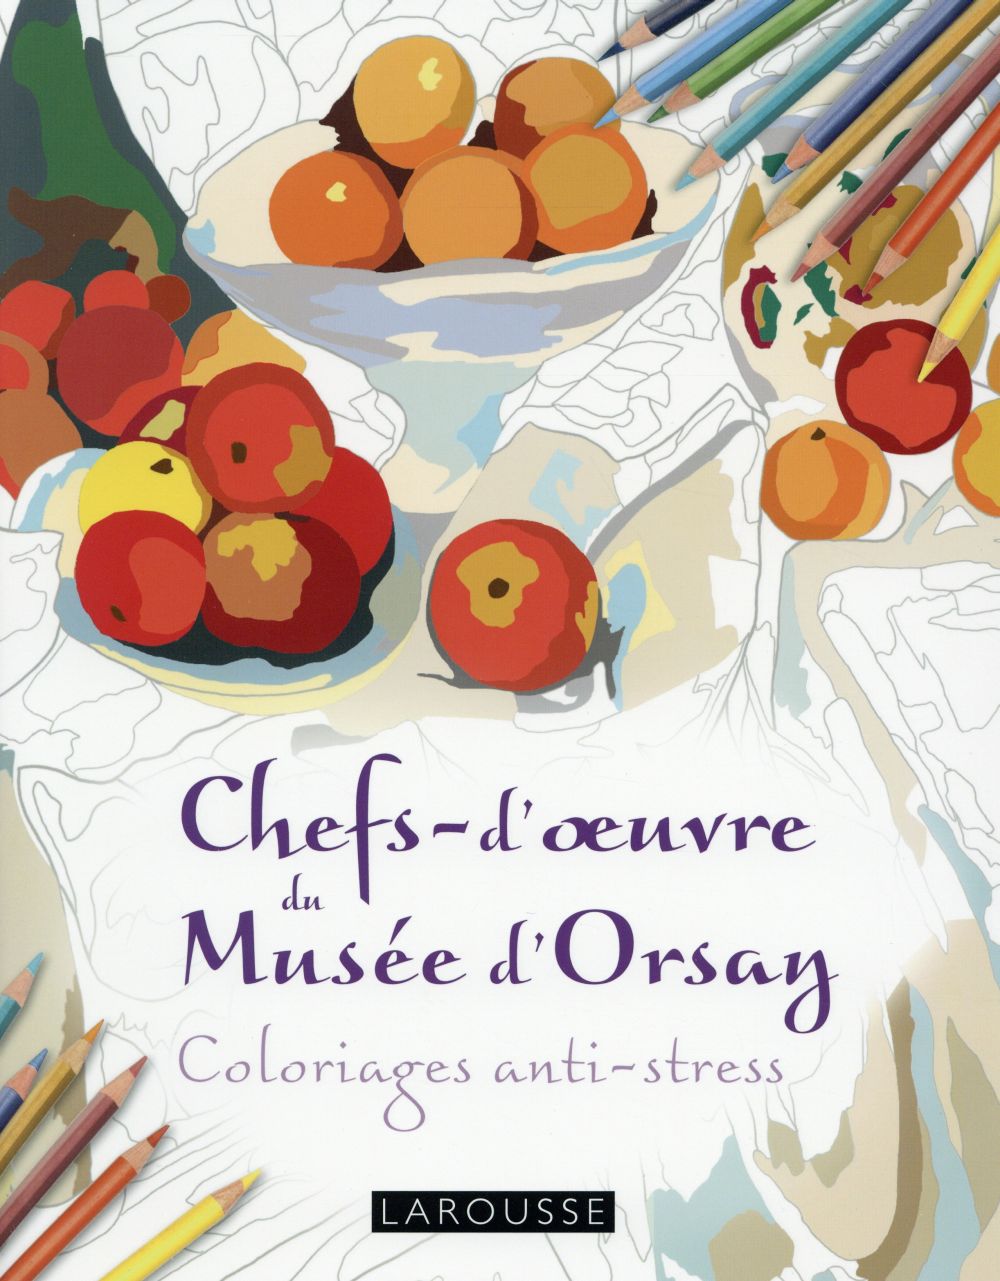 CHEFS D'OEUVRES DU MUSEE D'ORSAY COLORIAGES ANTI-STRESS